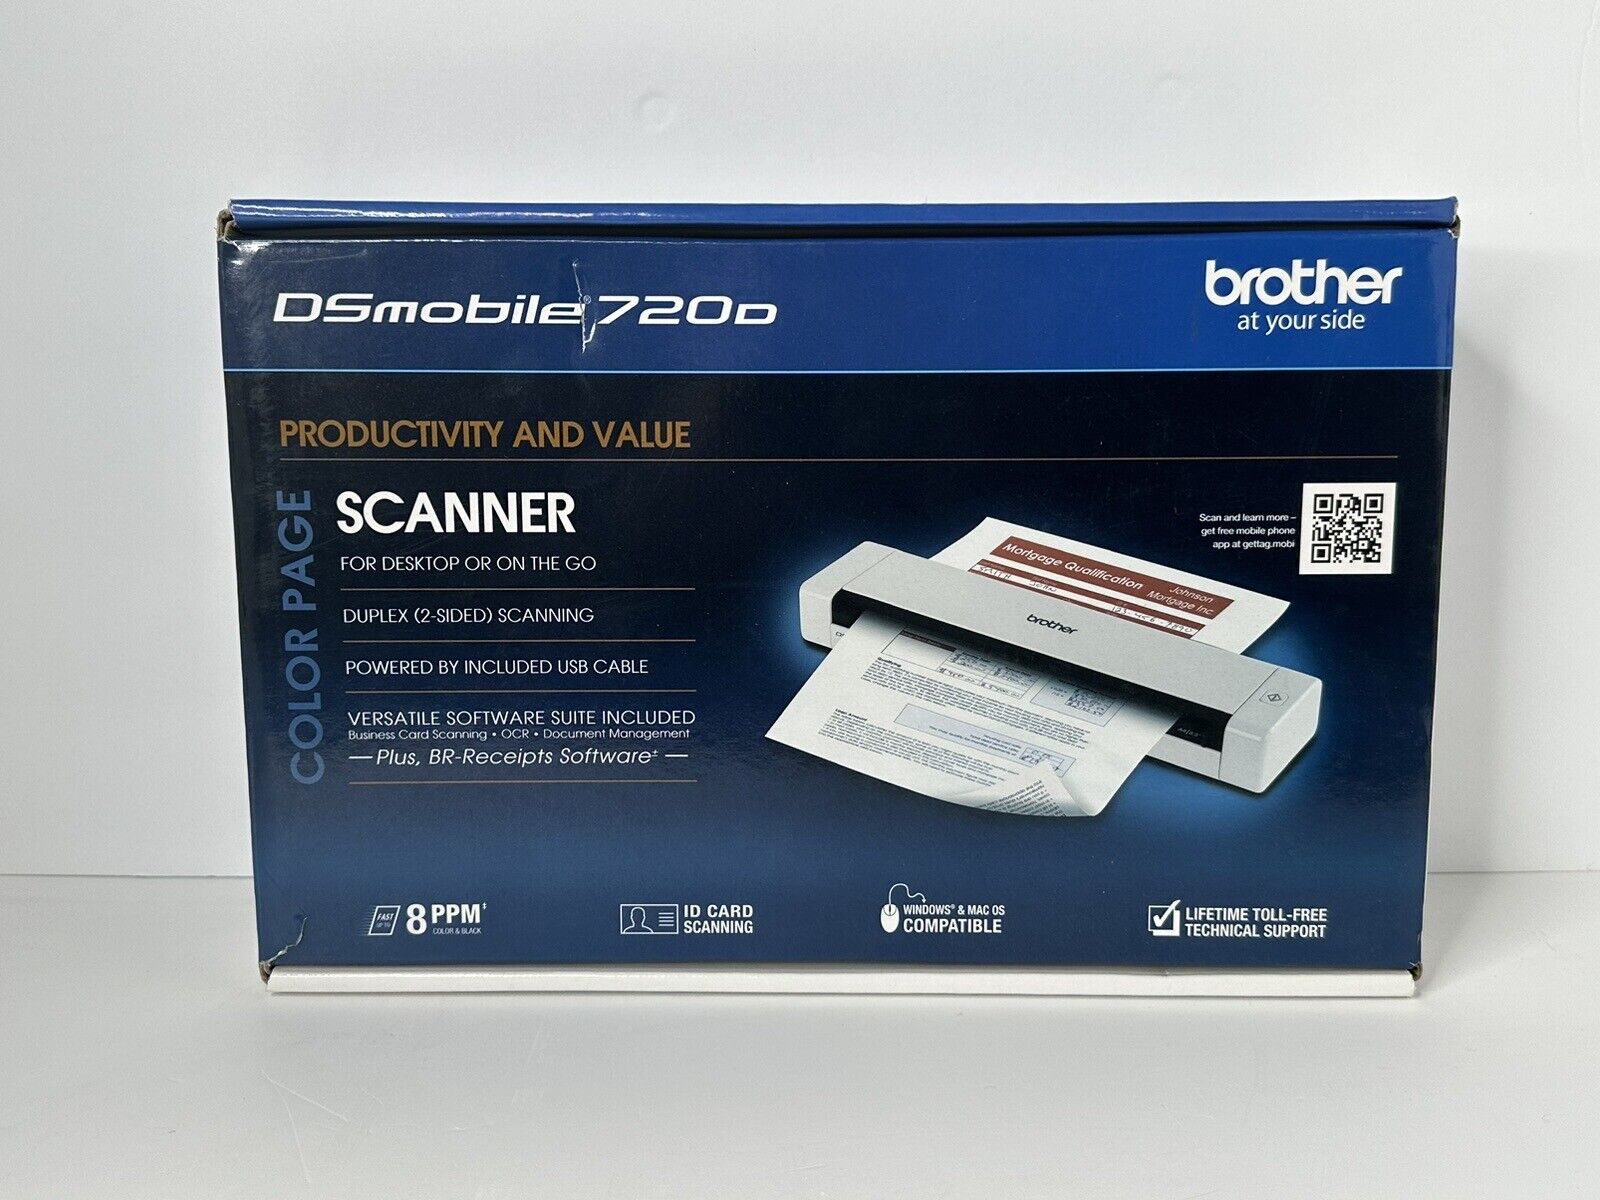 Brother DSmobile 720D  Compact Duplex Color Page Scanner - USB Win/Mac